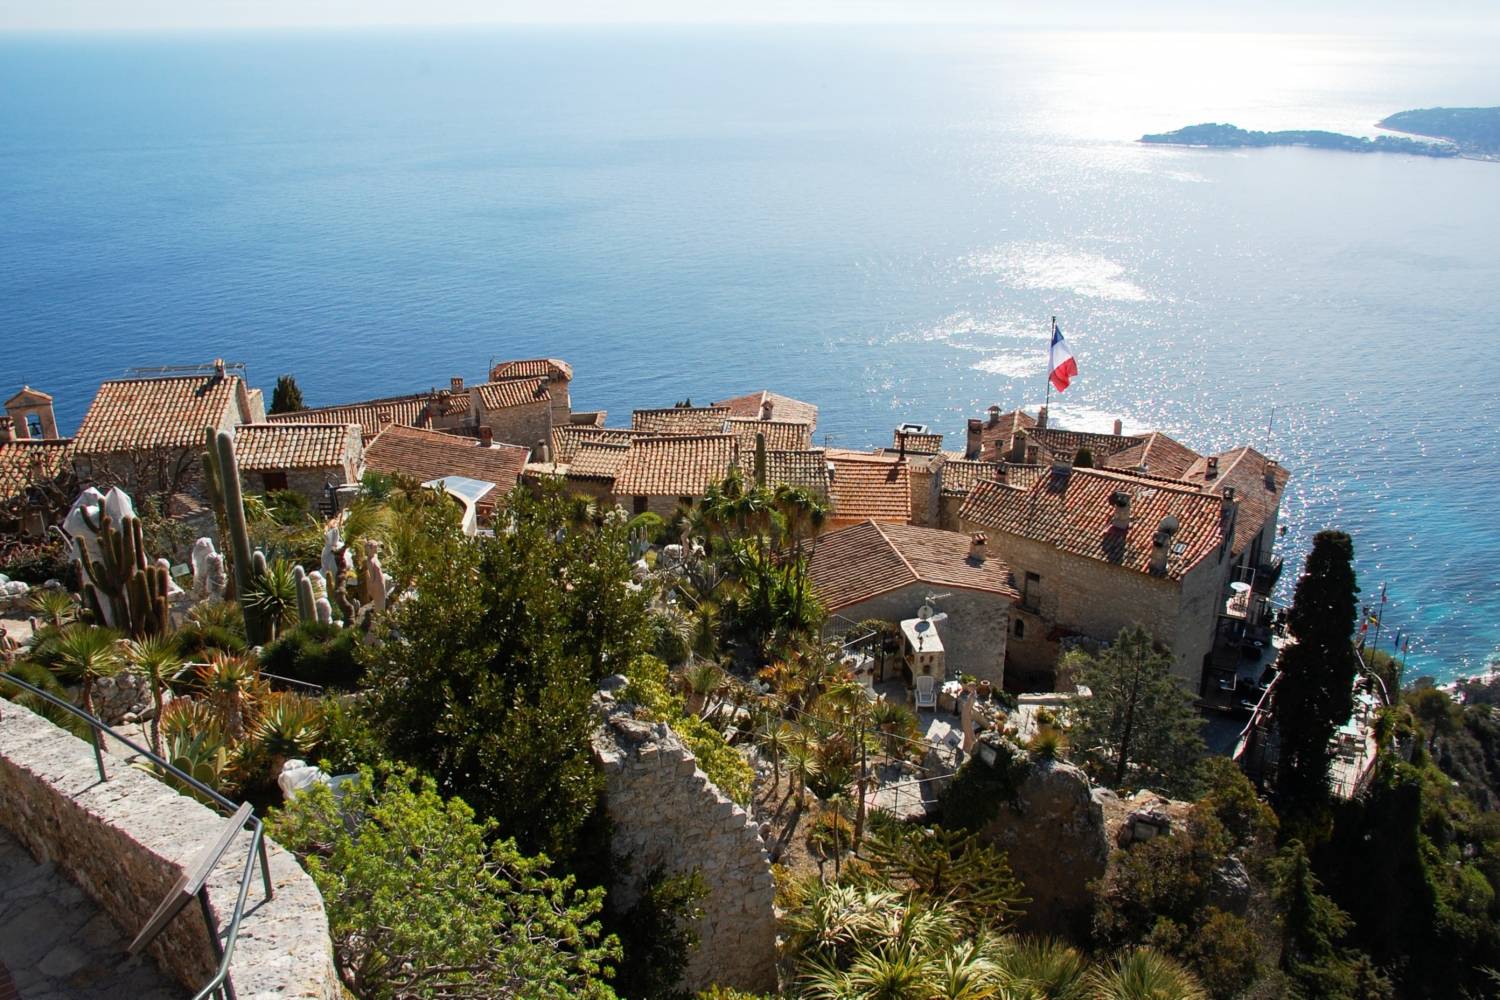 Enjoy a private chef after an amazing day in Roquebrune cap martin - Take a Chef